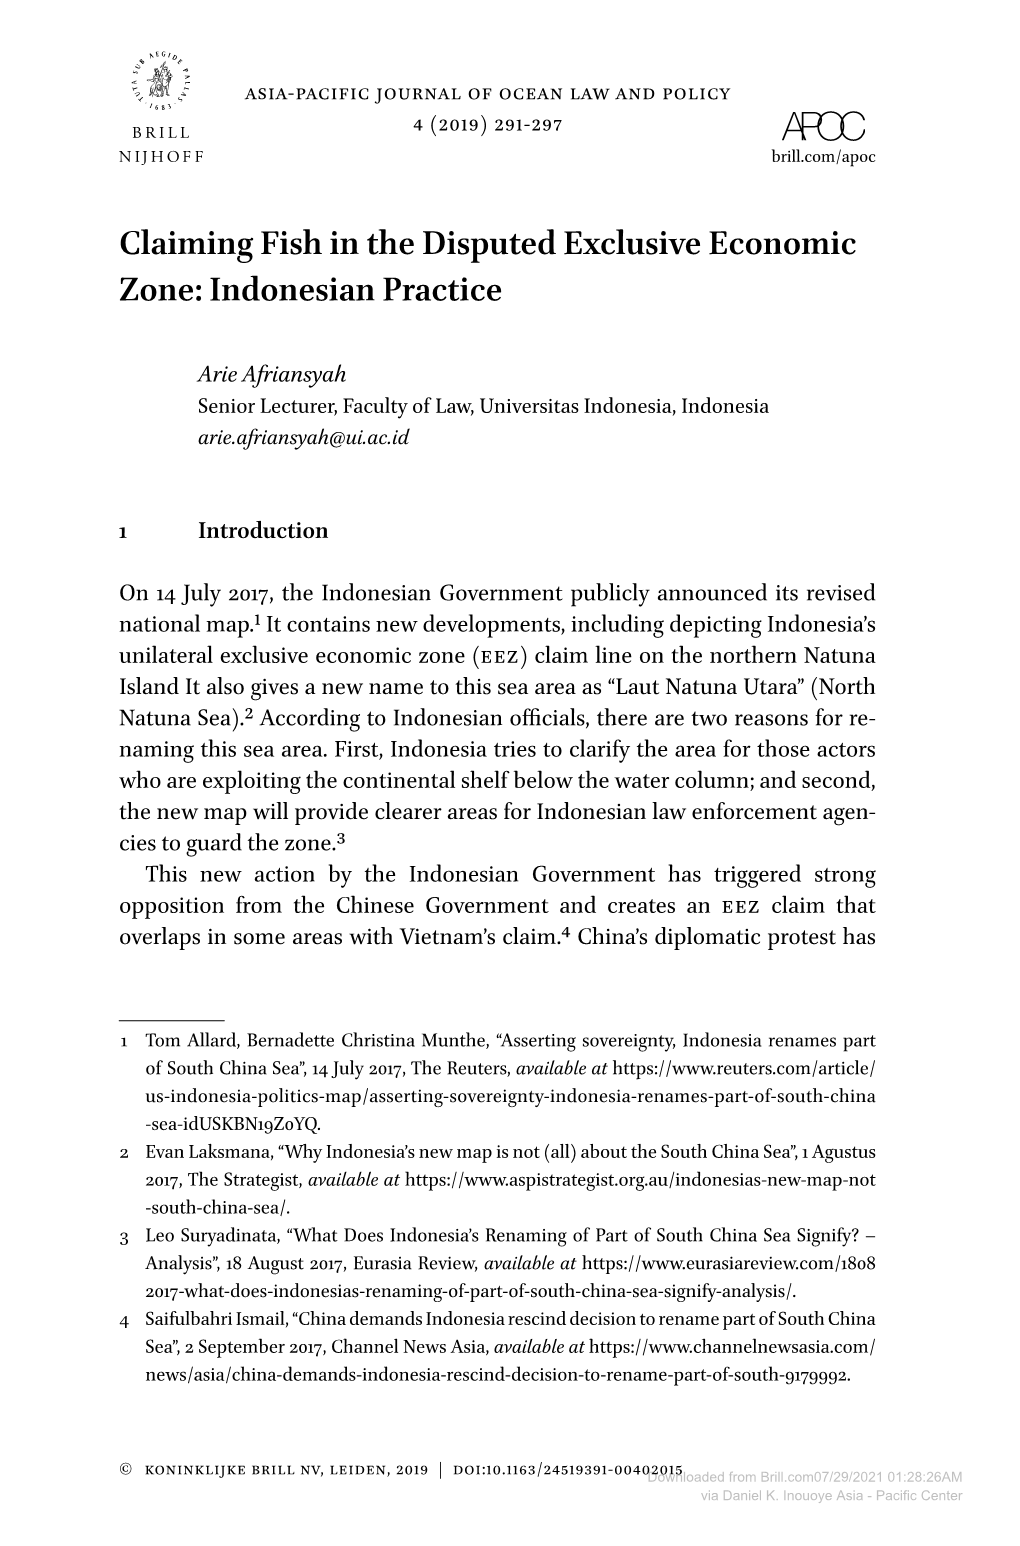 Claiming Fish in the Disputed Exclusive Economic Zone: Indonesian Practice